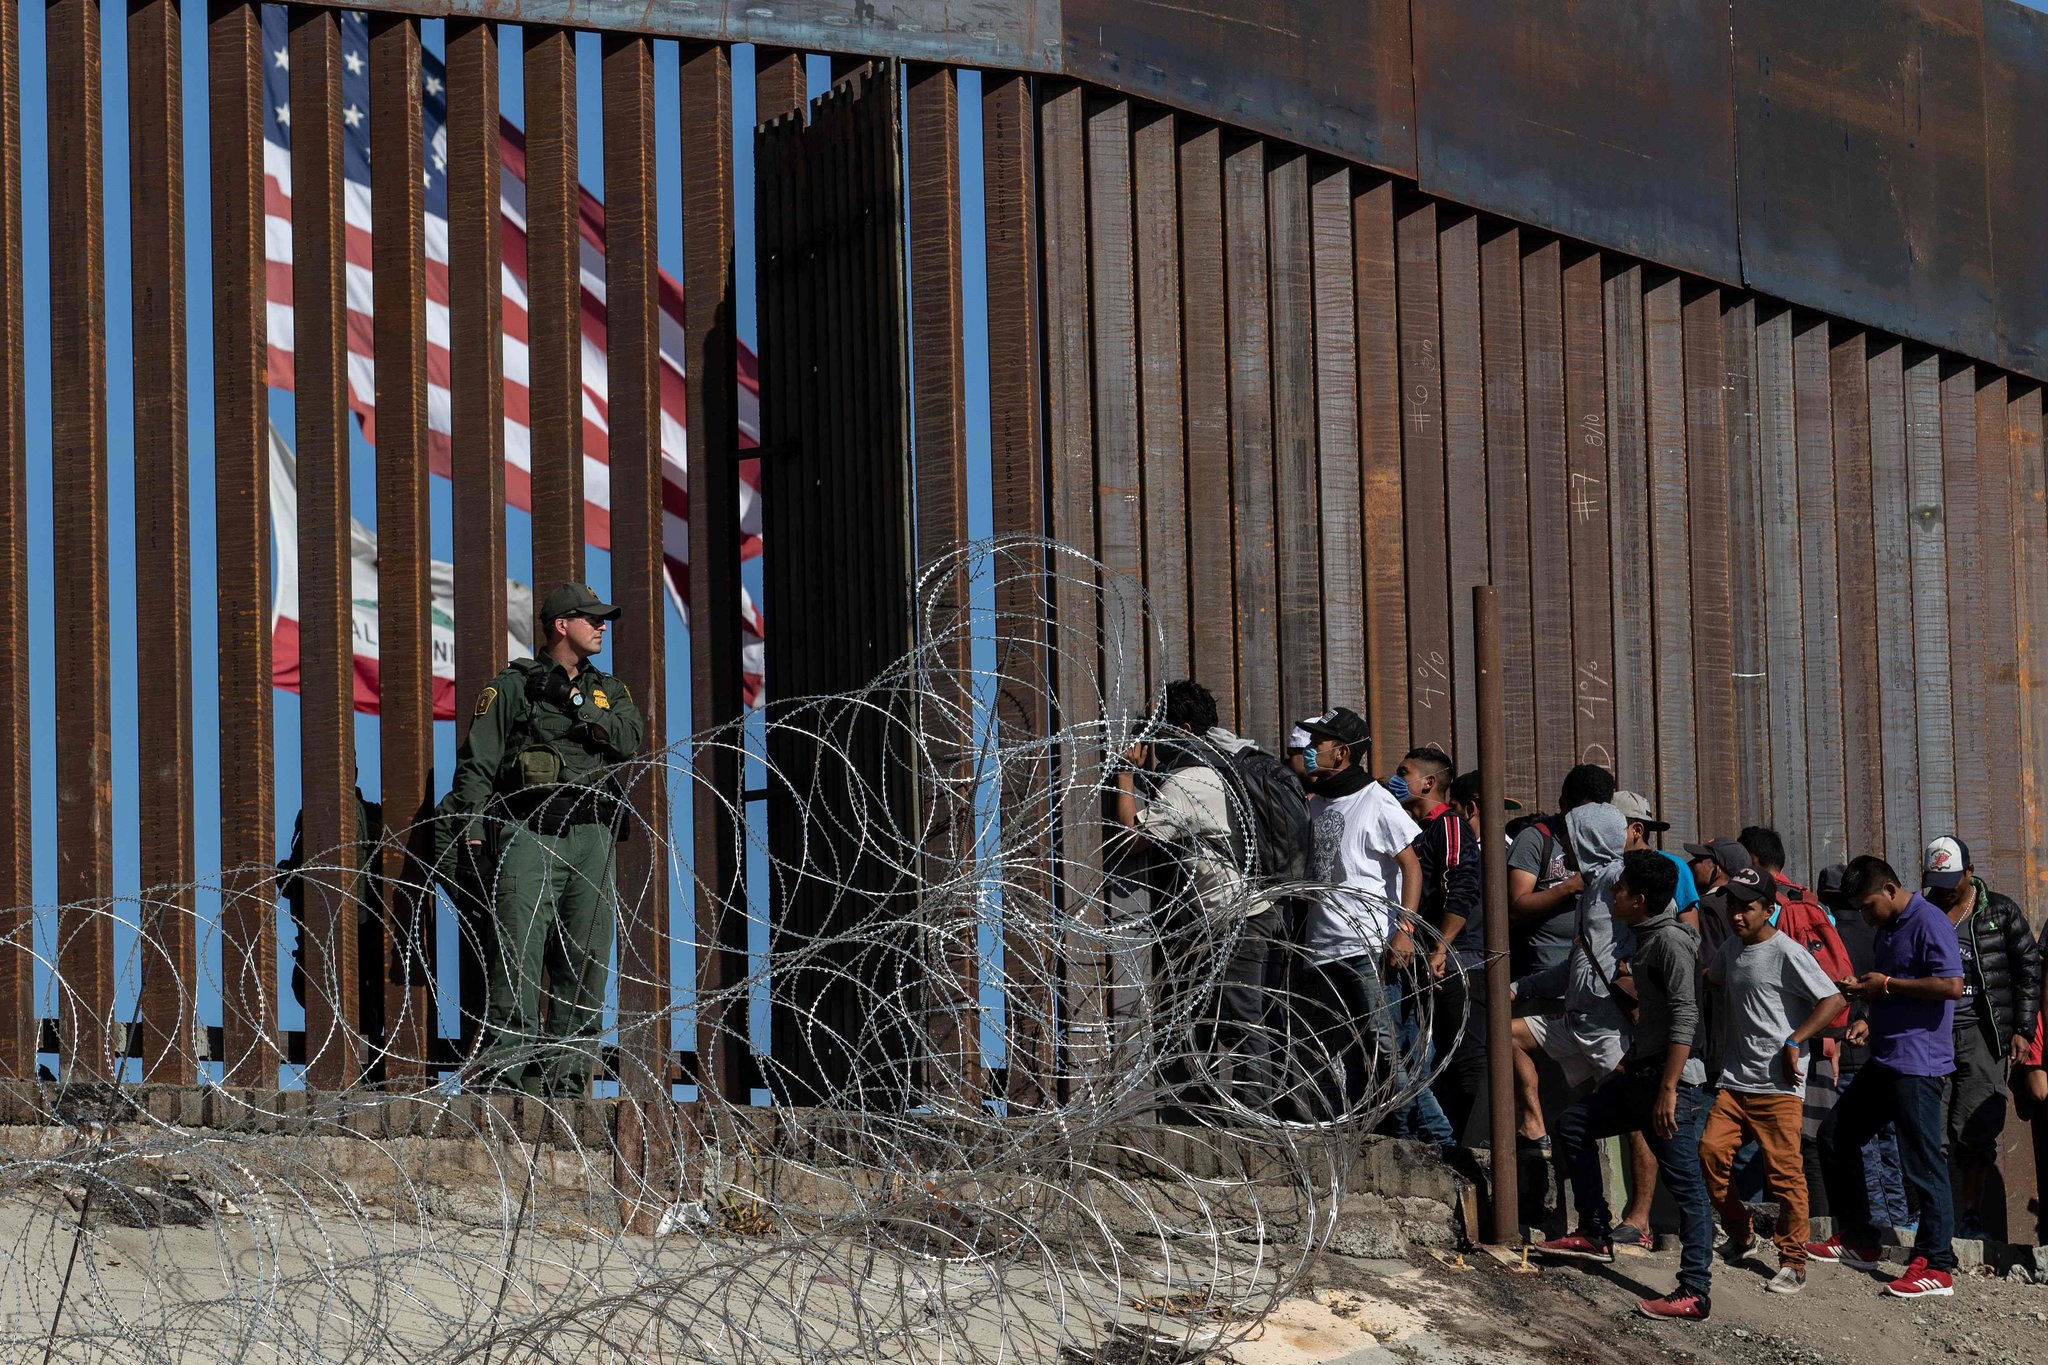 U.S.-Mexico border crossing closed due to protests